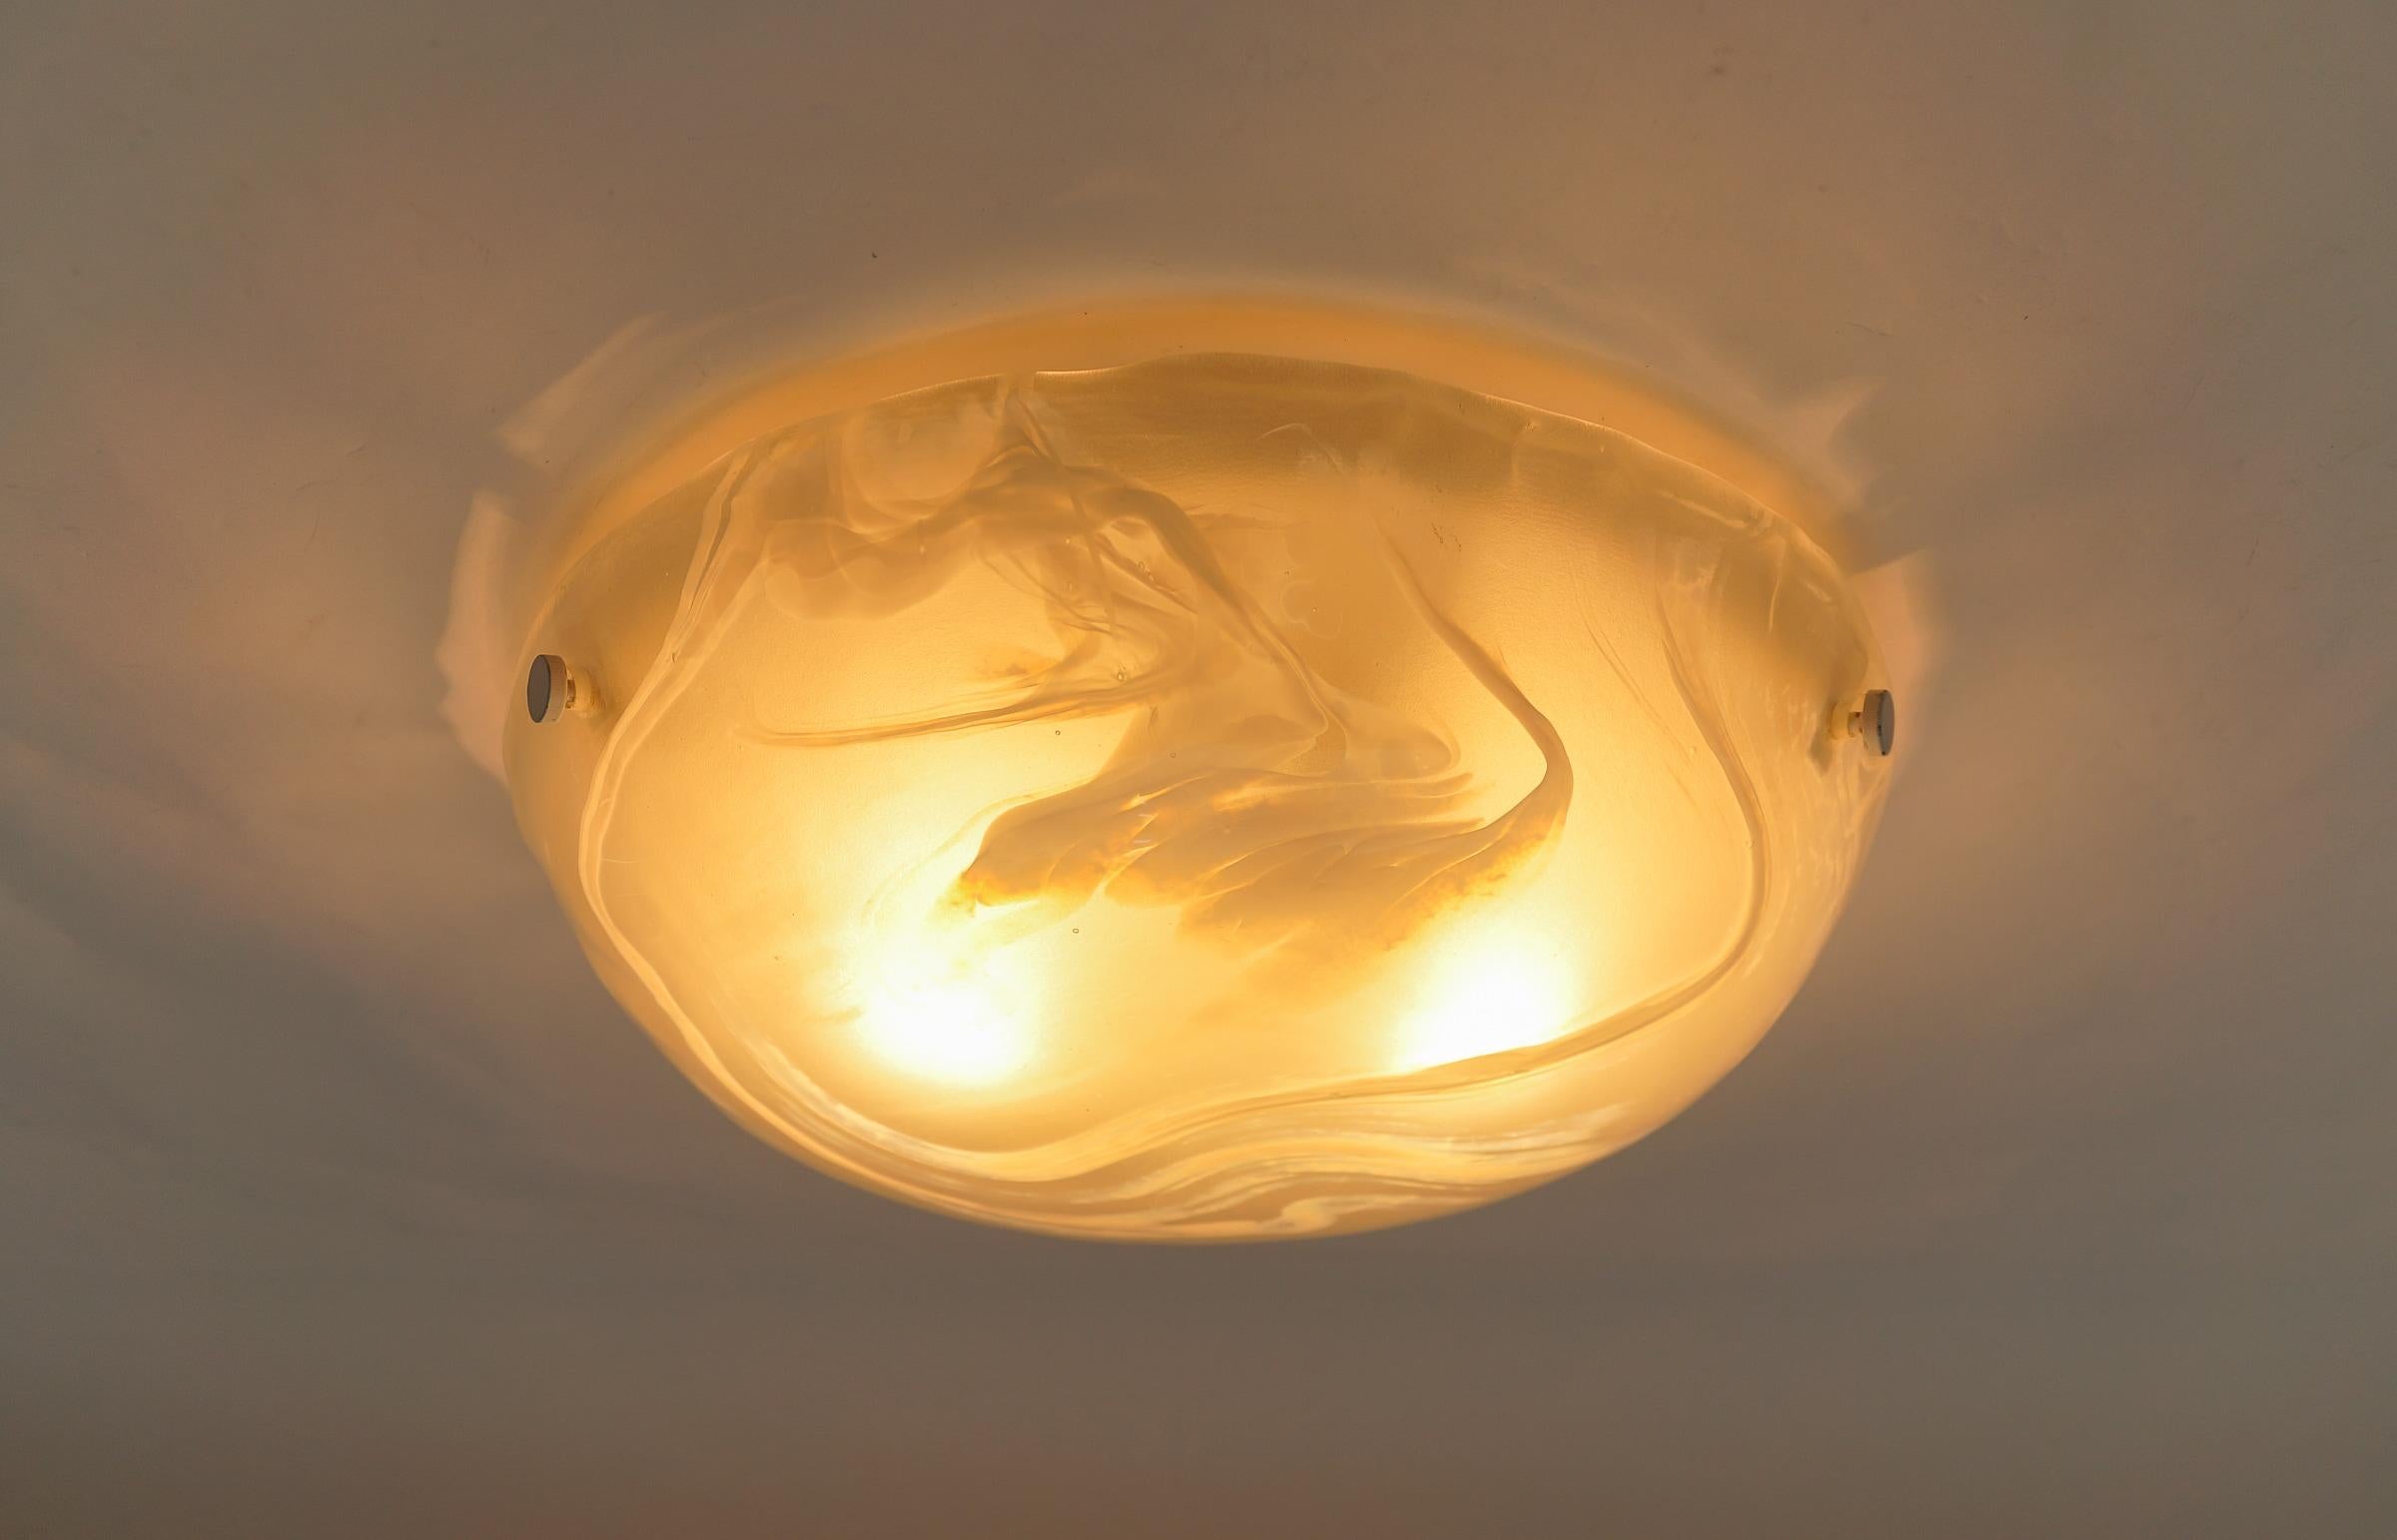 Mid-20th Century White and Gold Murano Glass Flush Mount Light by Hillebrand, Germany 1960s For Sale